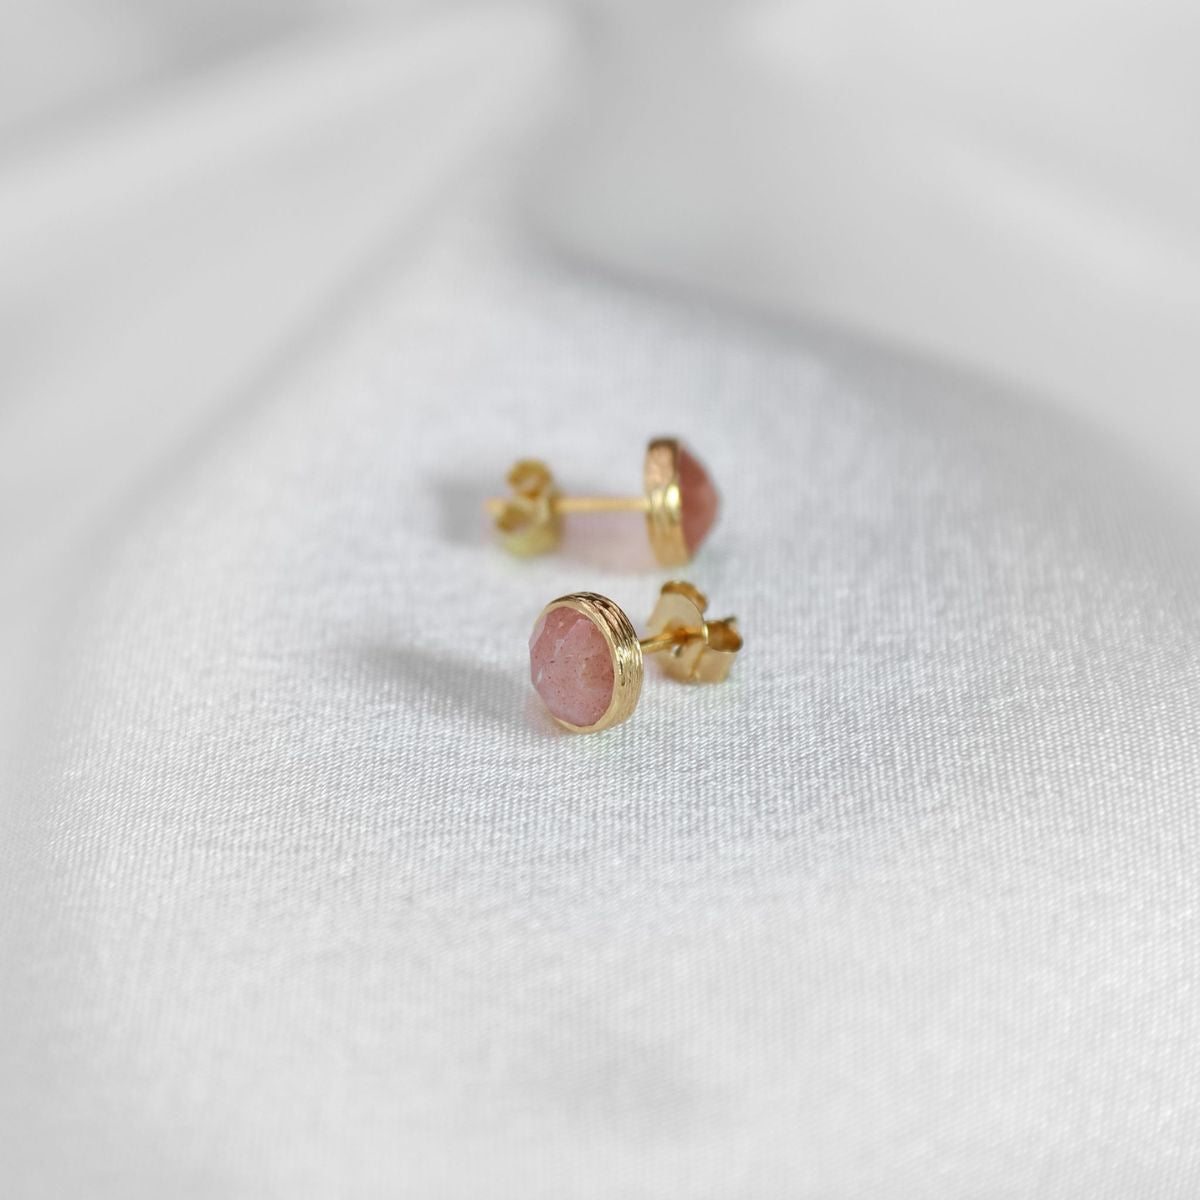 a pair of studs on a white cloth